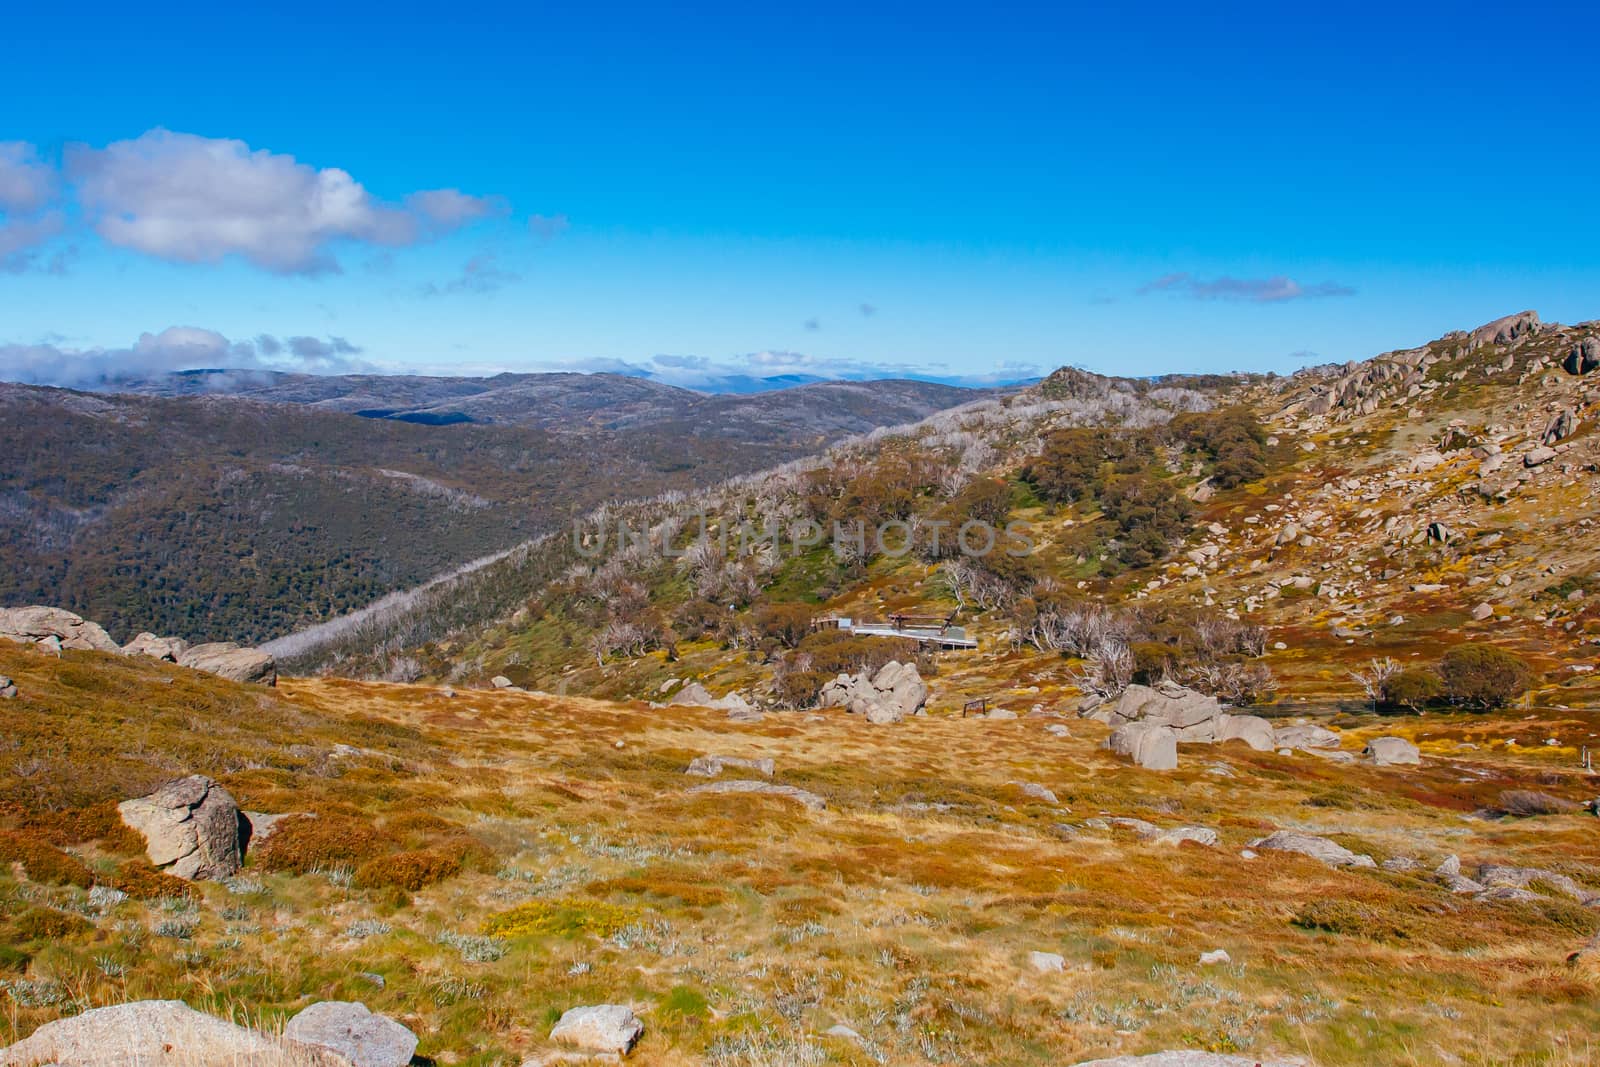 A spectacular view across the valley on the Kosciuszko walk near the summit of Thredo in Snowy Mountains, New South Wales, Australia